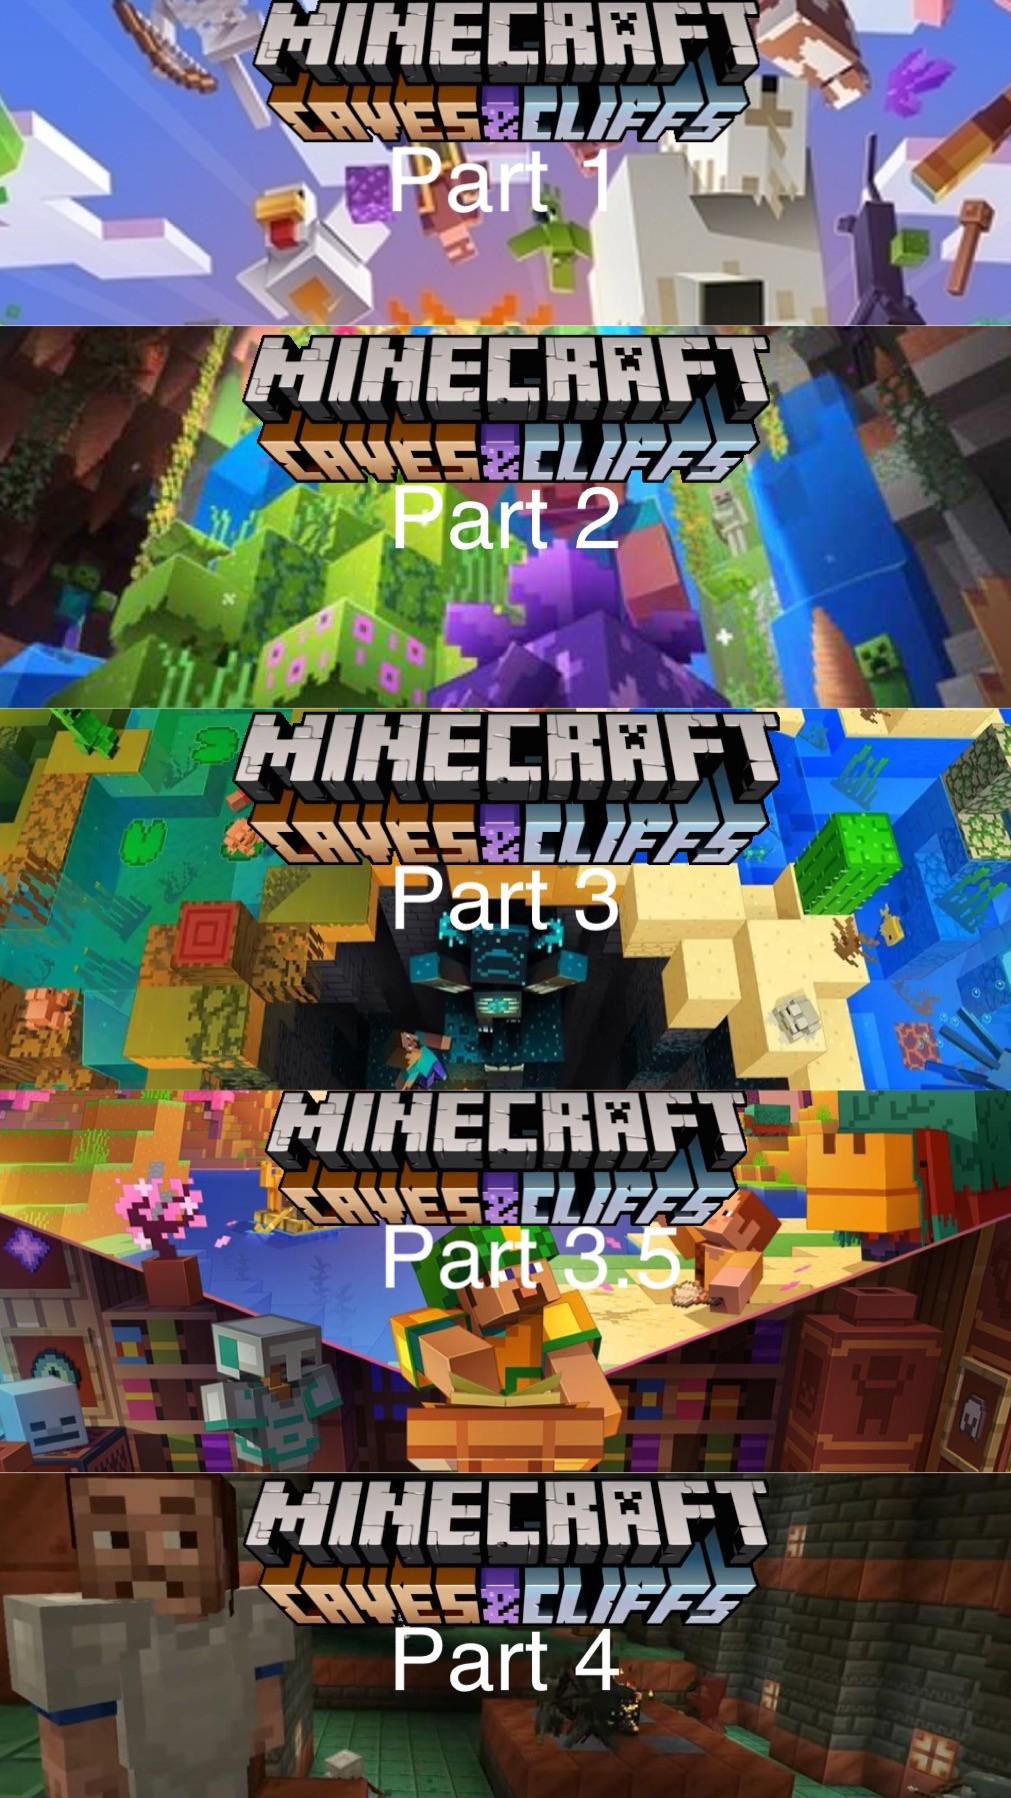 Minecraft Memes - 1.21 is caves and cliffs part 4?